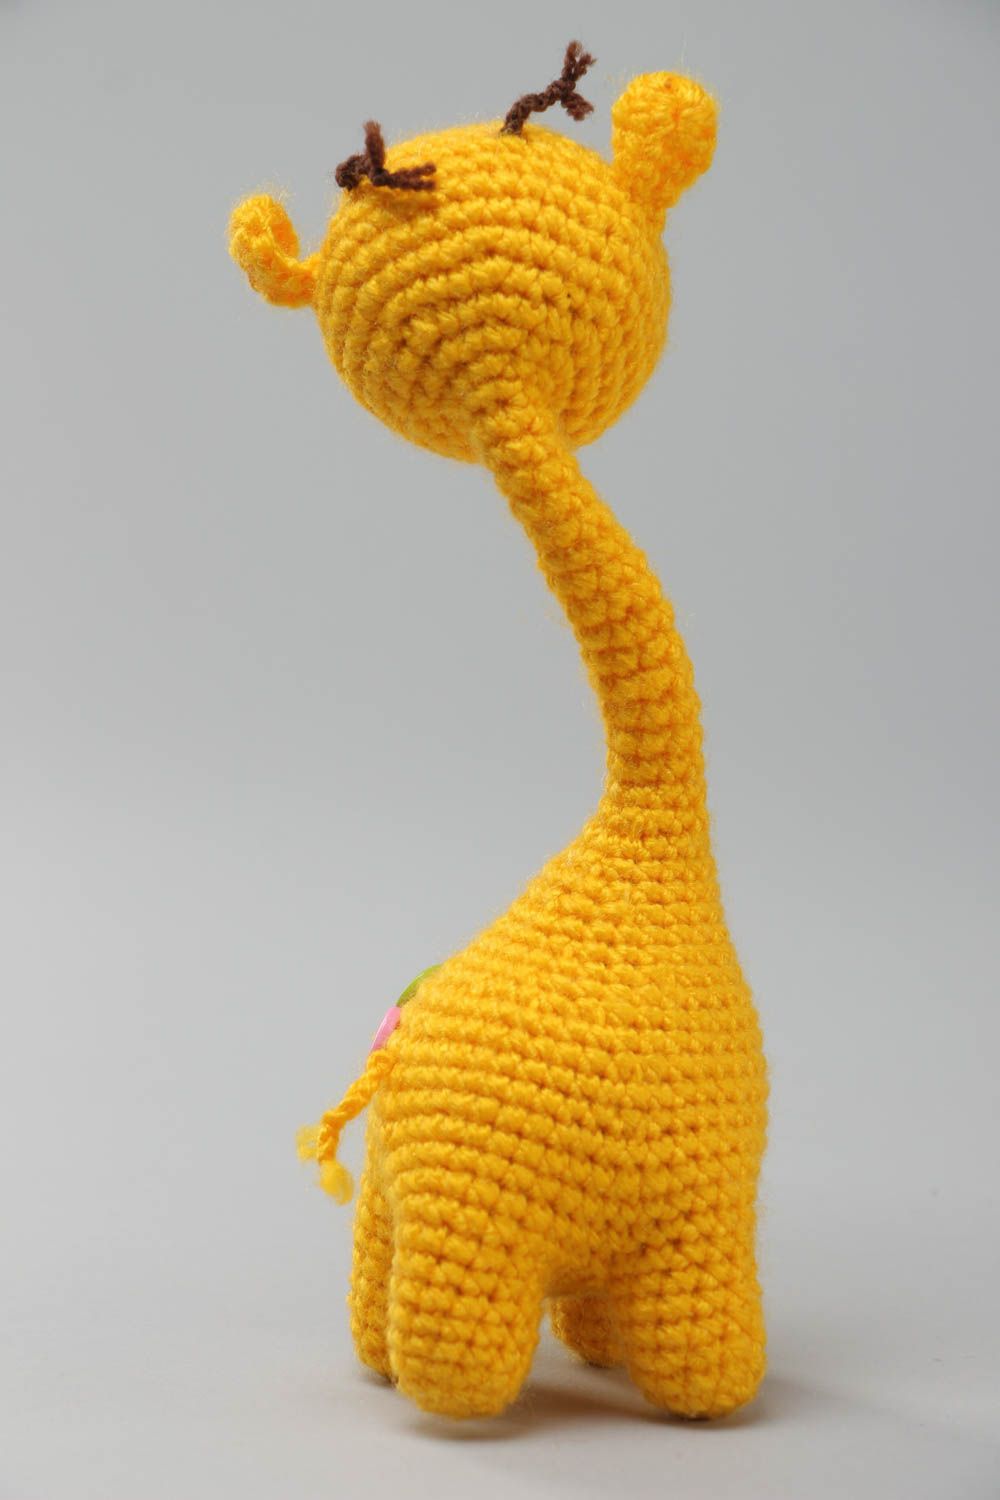 Handmade collectible crochet soft toy yellow giraffe with frame inside photo 4